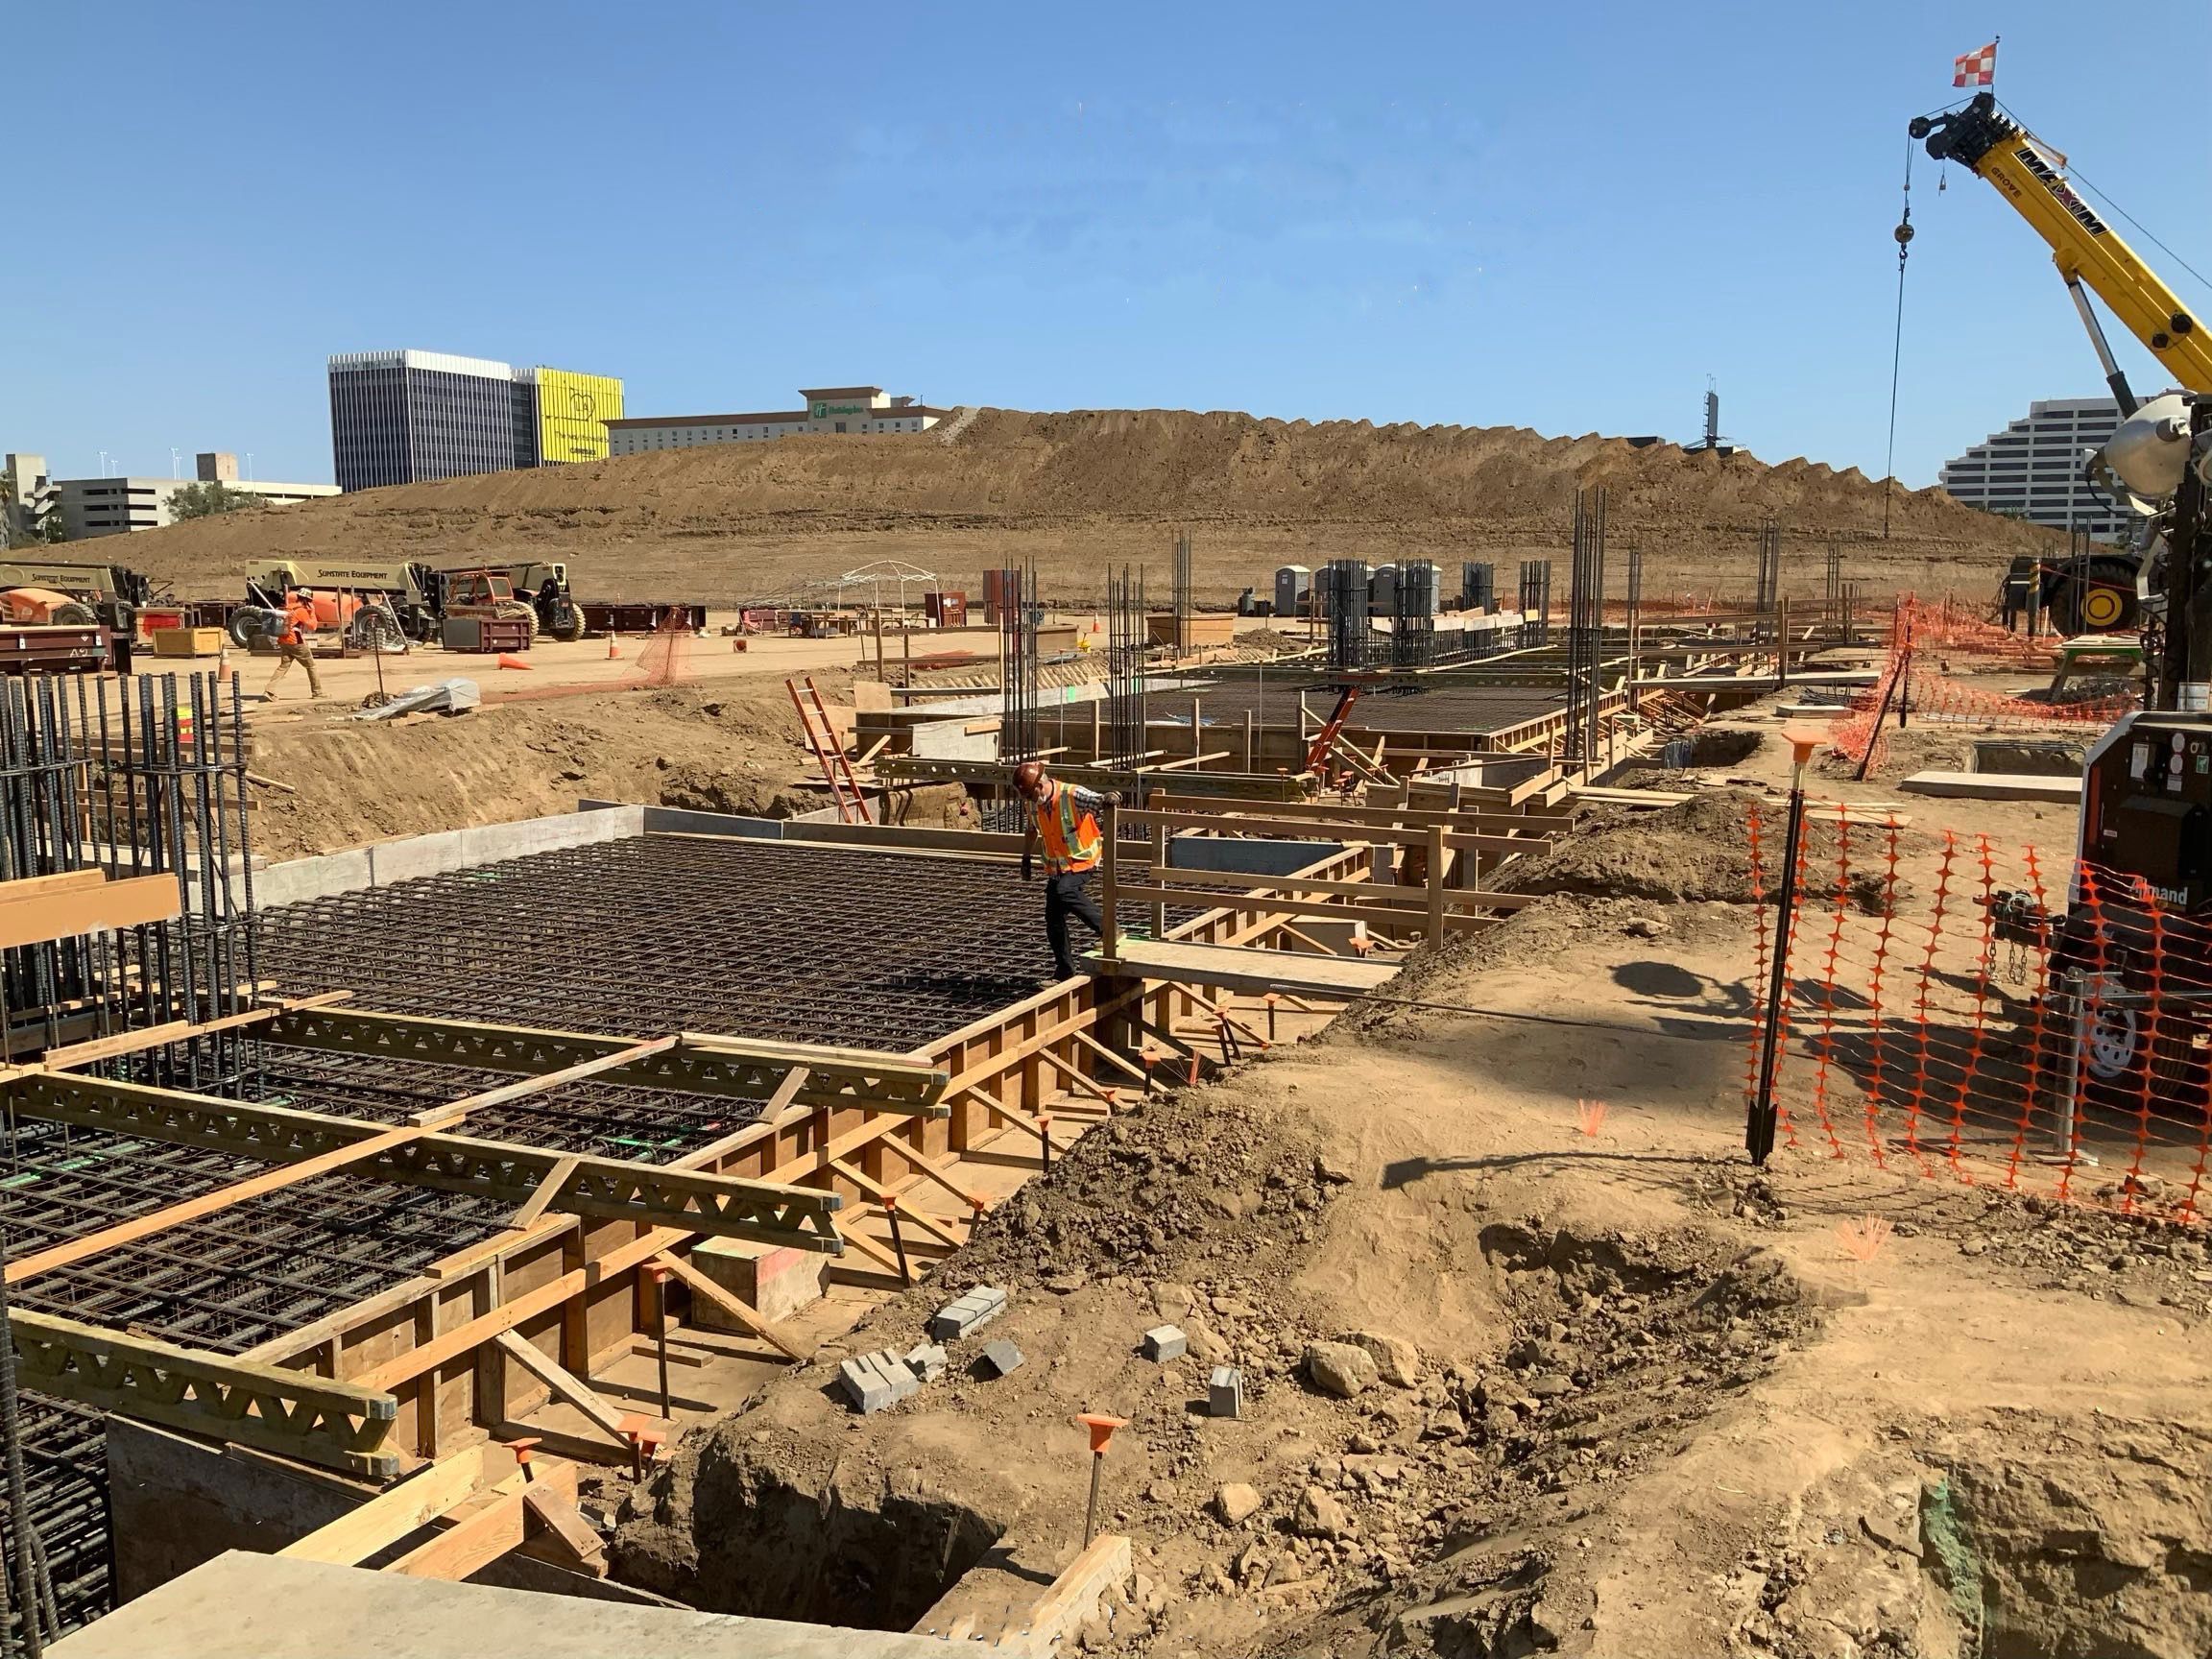 Rebar being inspected for one of the shear walls, which help prevent the structure from wind and seismic activity, at the Consolidated Rent-A-Car facility.